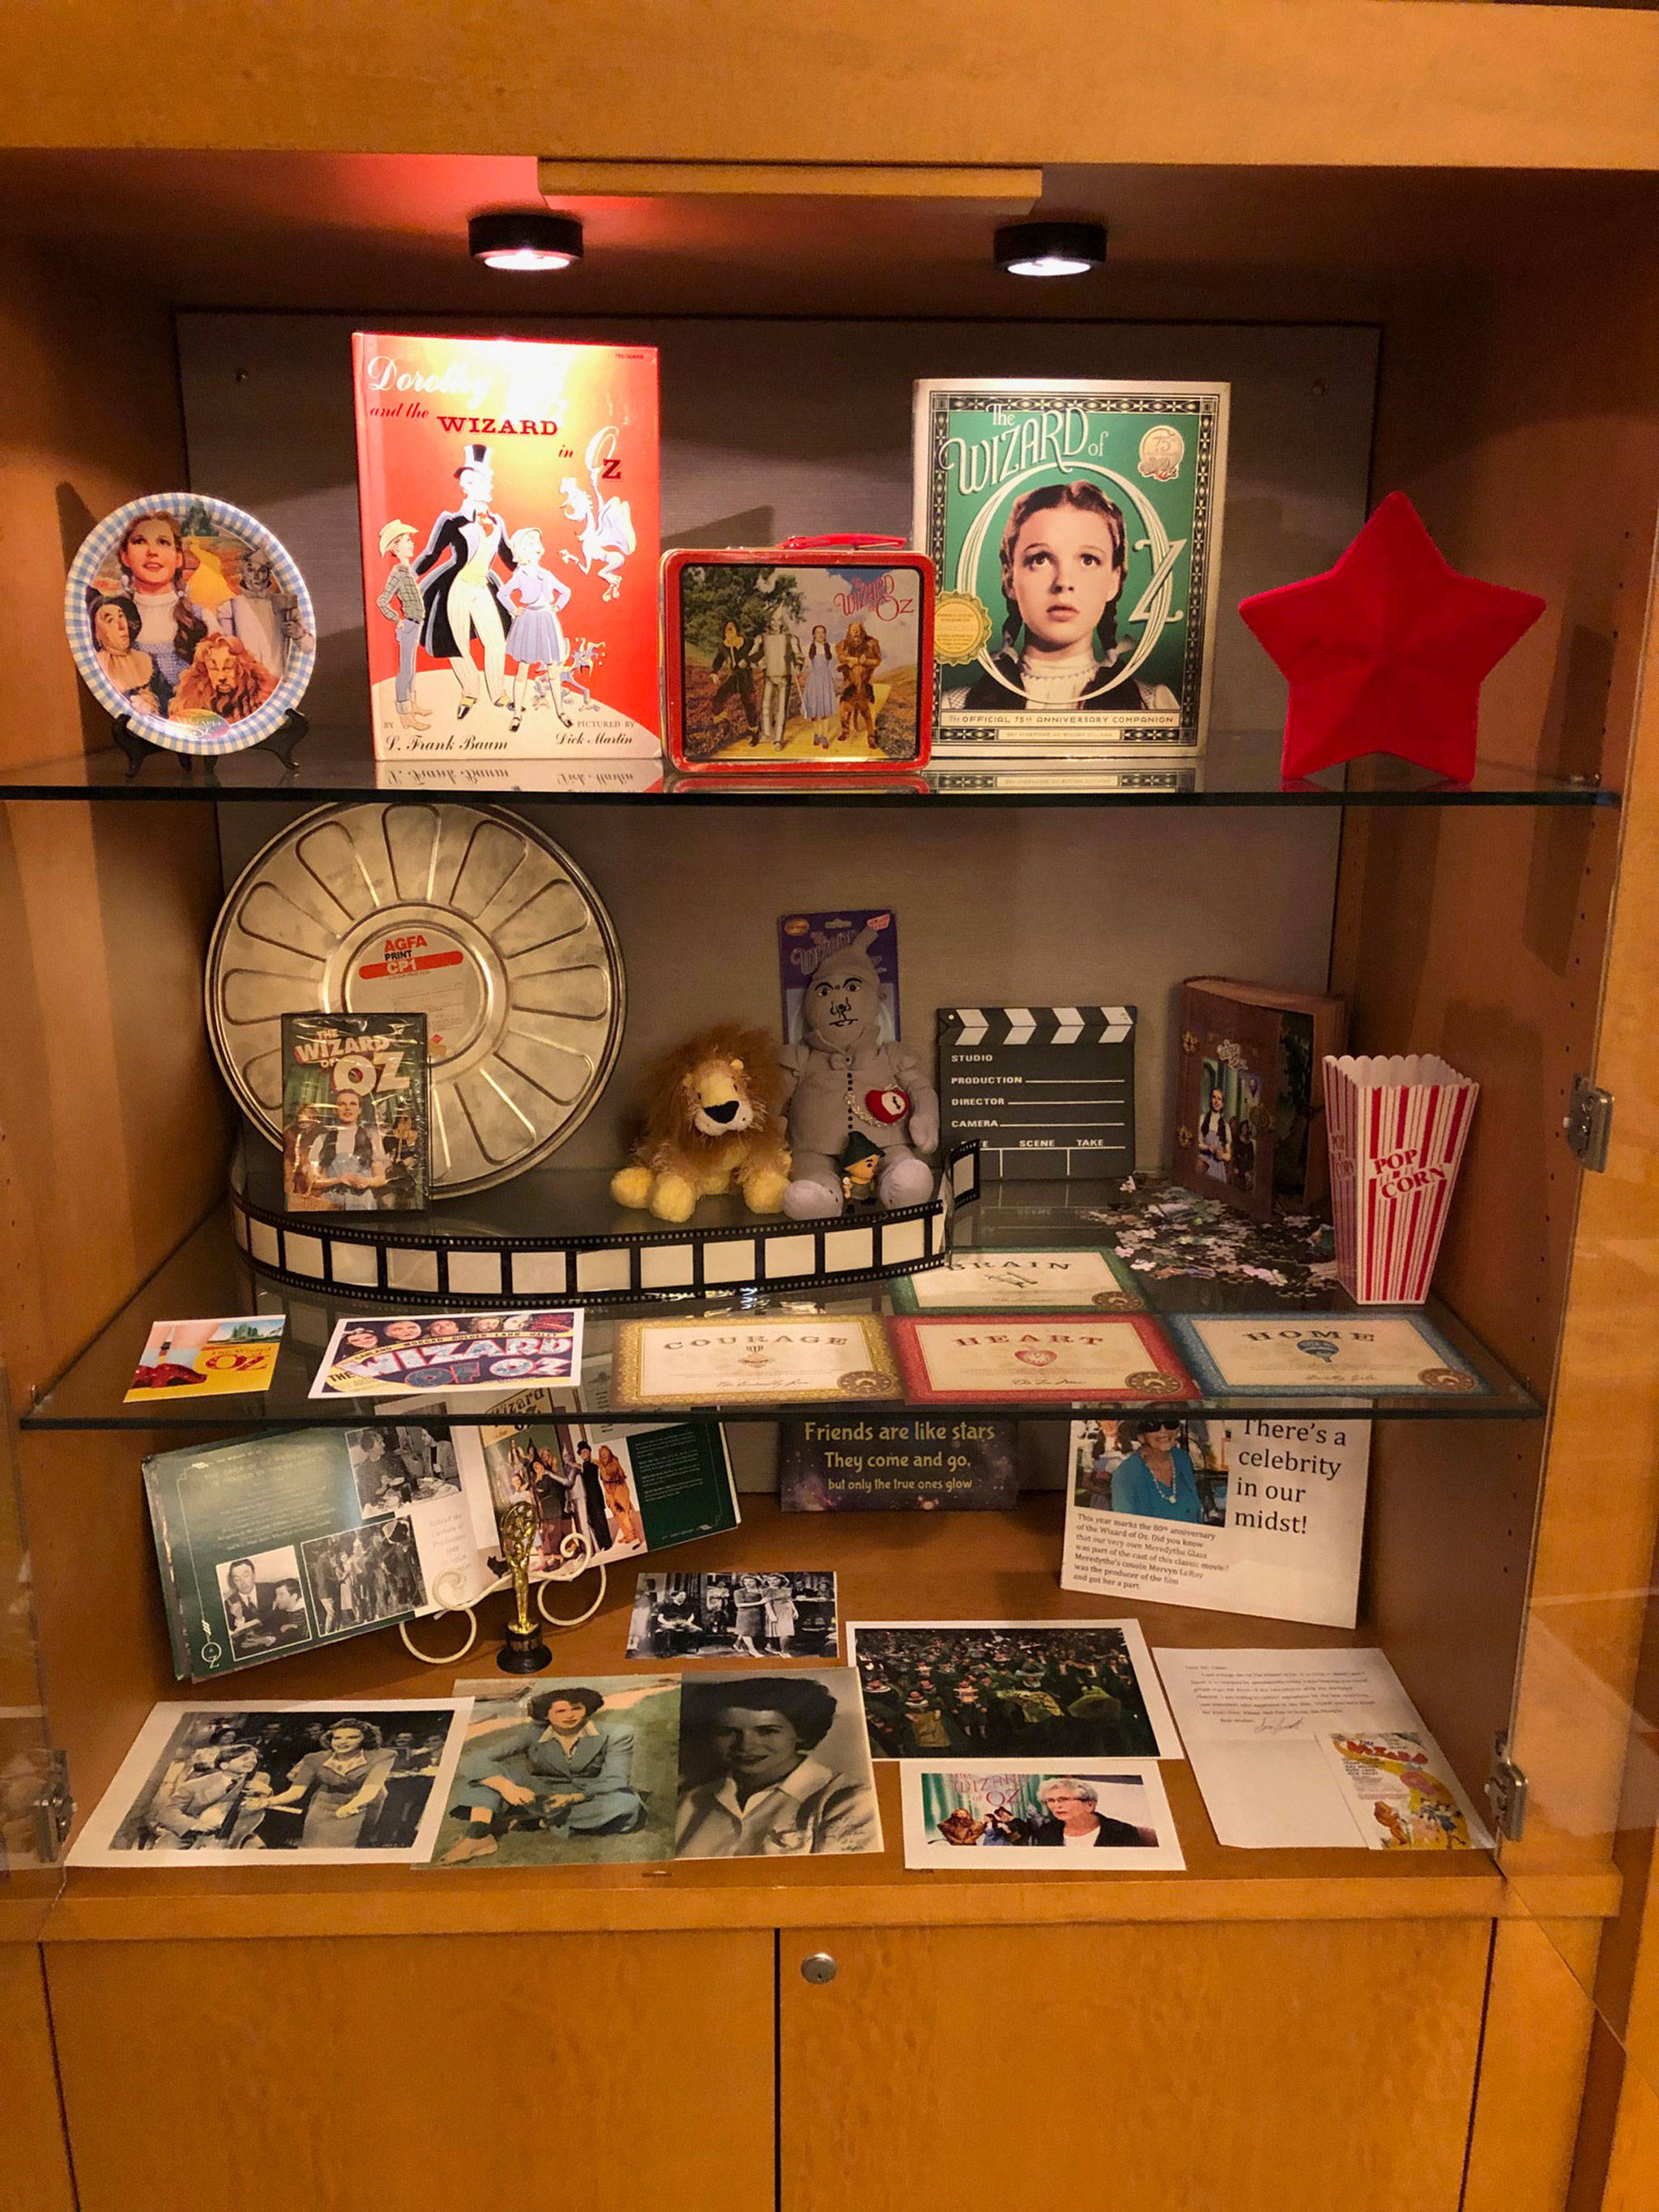 Memorabilia from “The Wizard of Oz” will be displayed at Covenant Shores on Mercer Island this month, to celebrate the movie’s 80th anniversary and one of its resident’s special connection to the film. Photo courtesy of Greg Asimakoupoulos